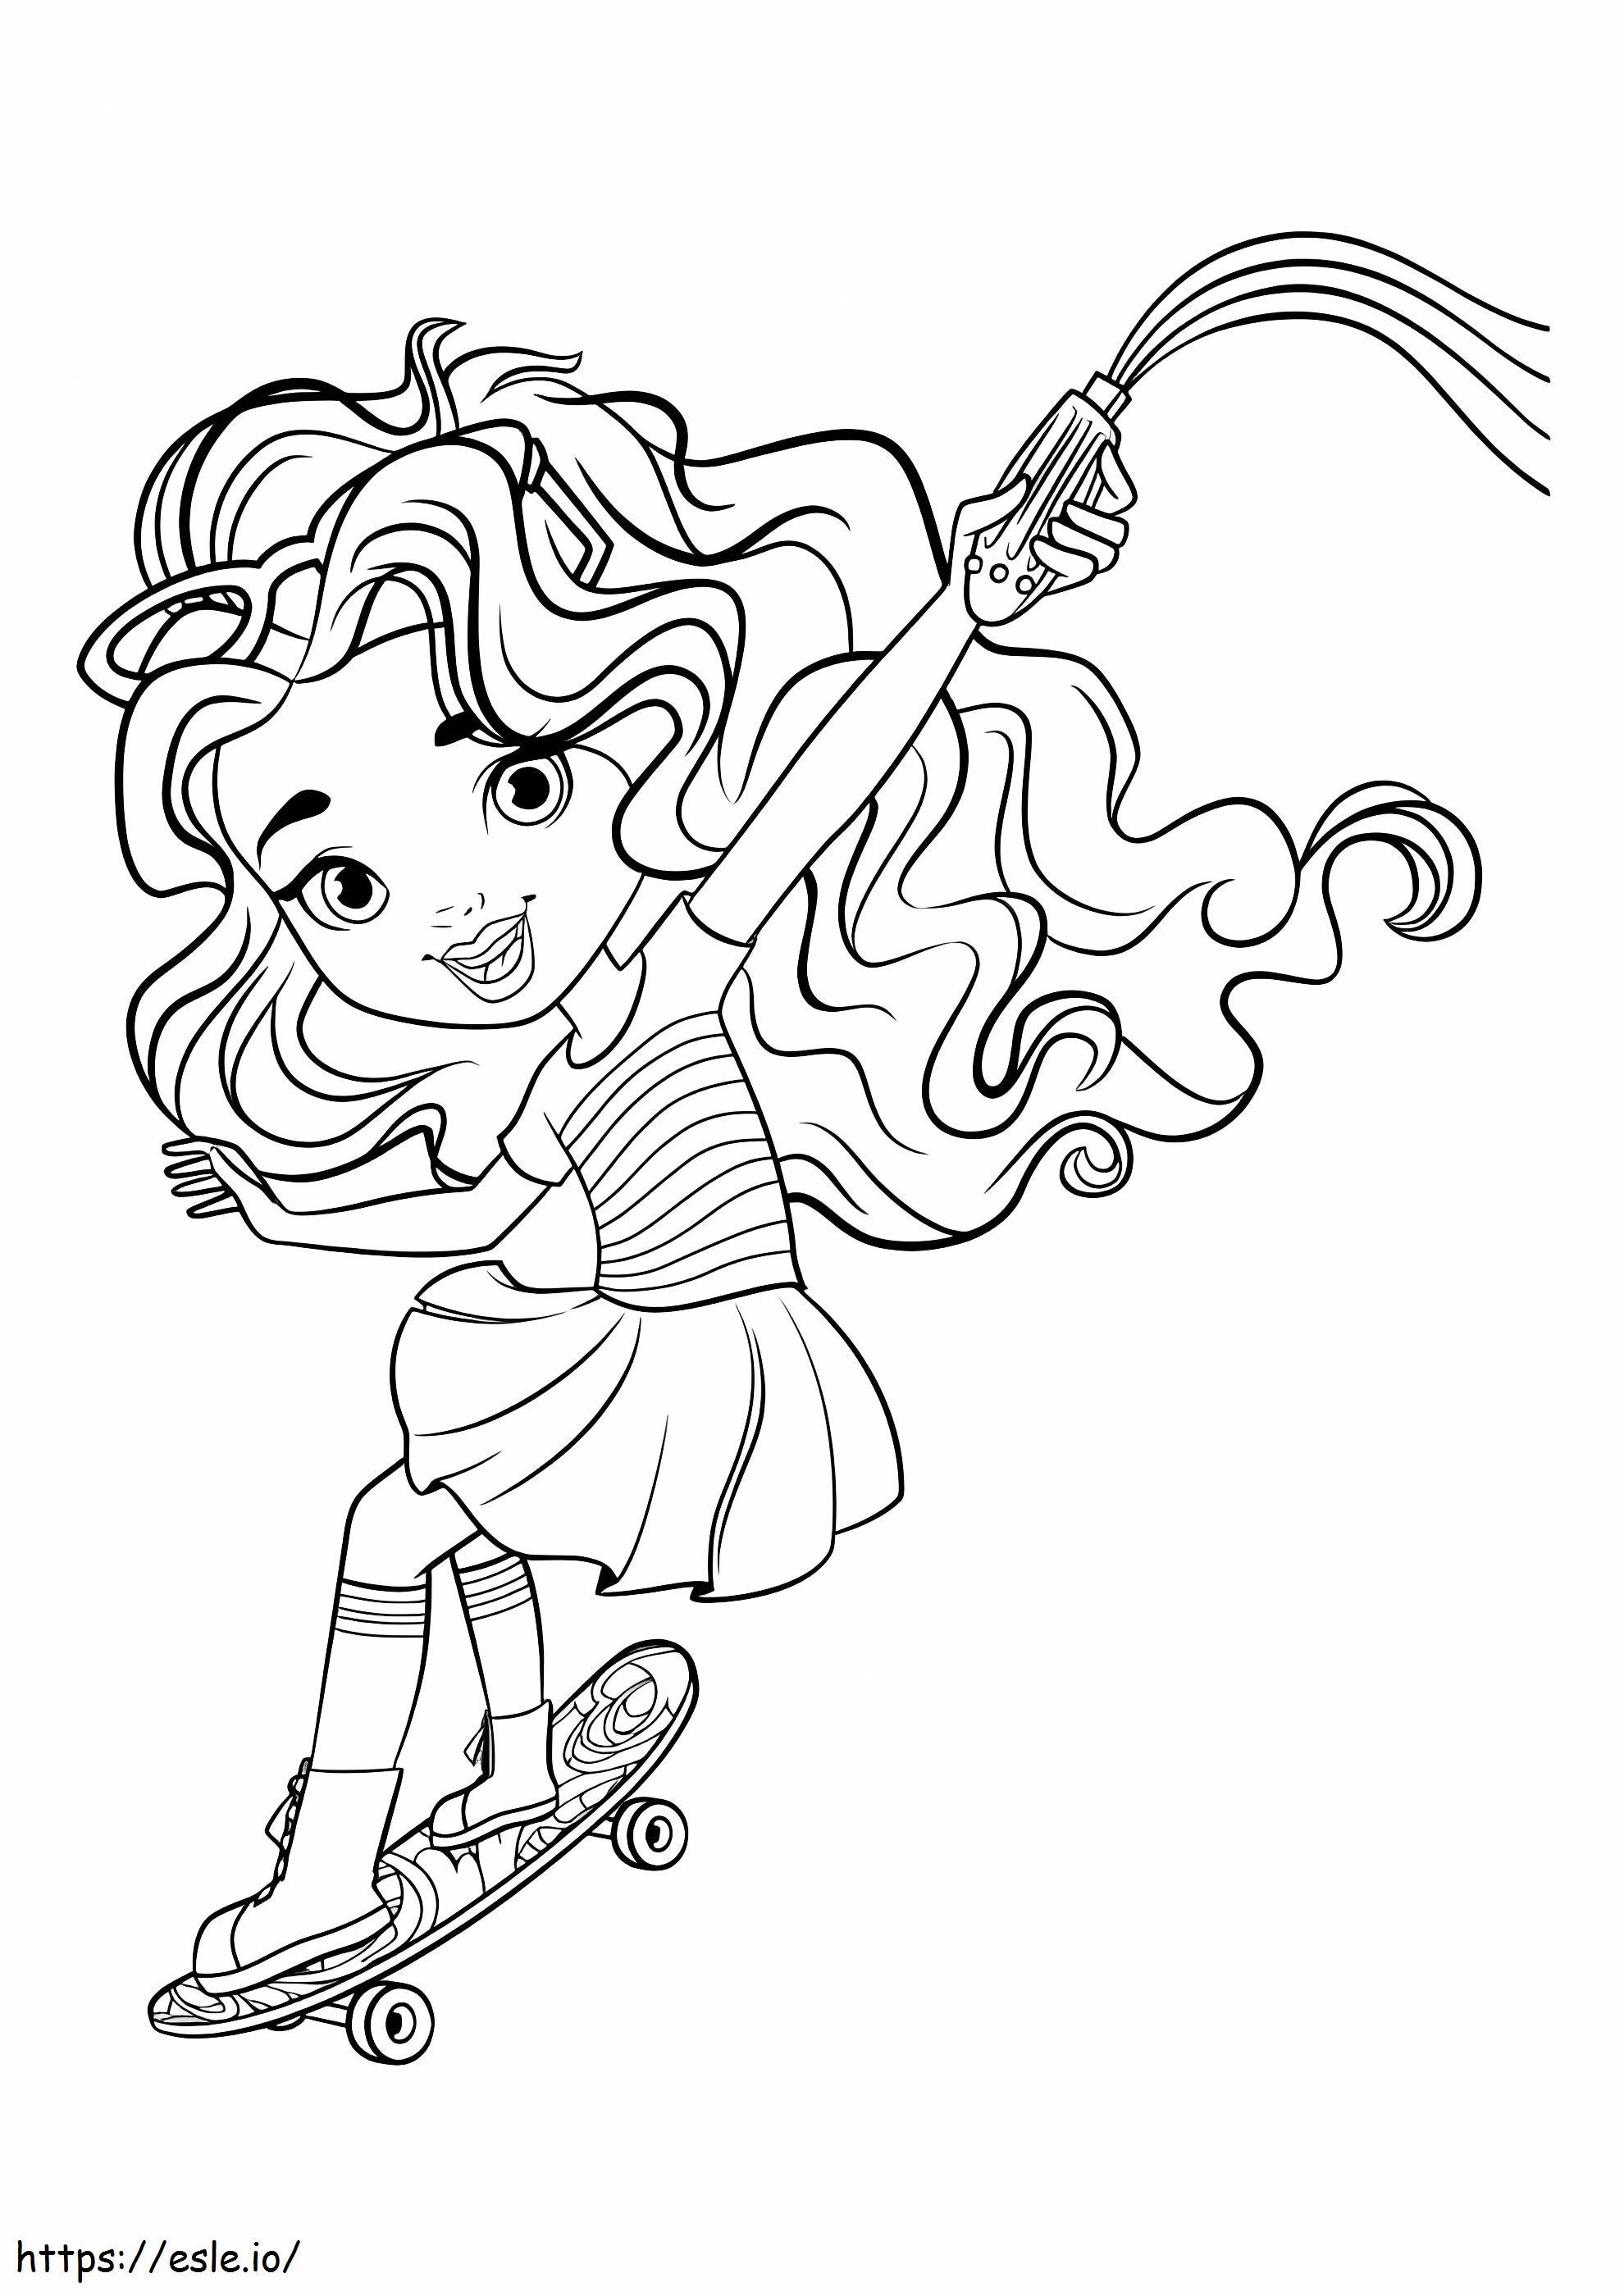 Happy Rox Sunny Day coloring page